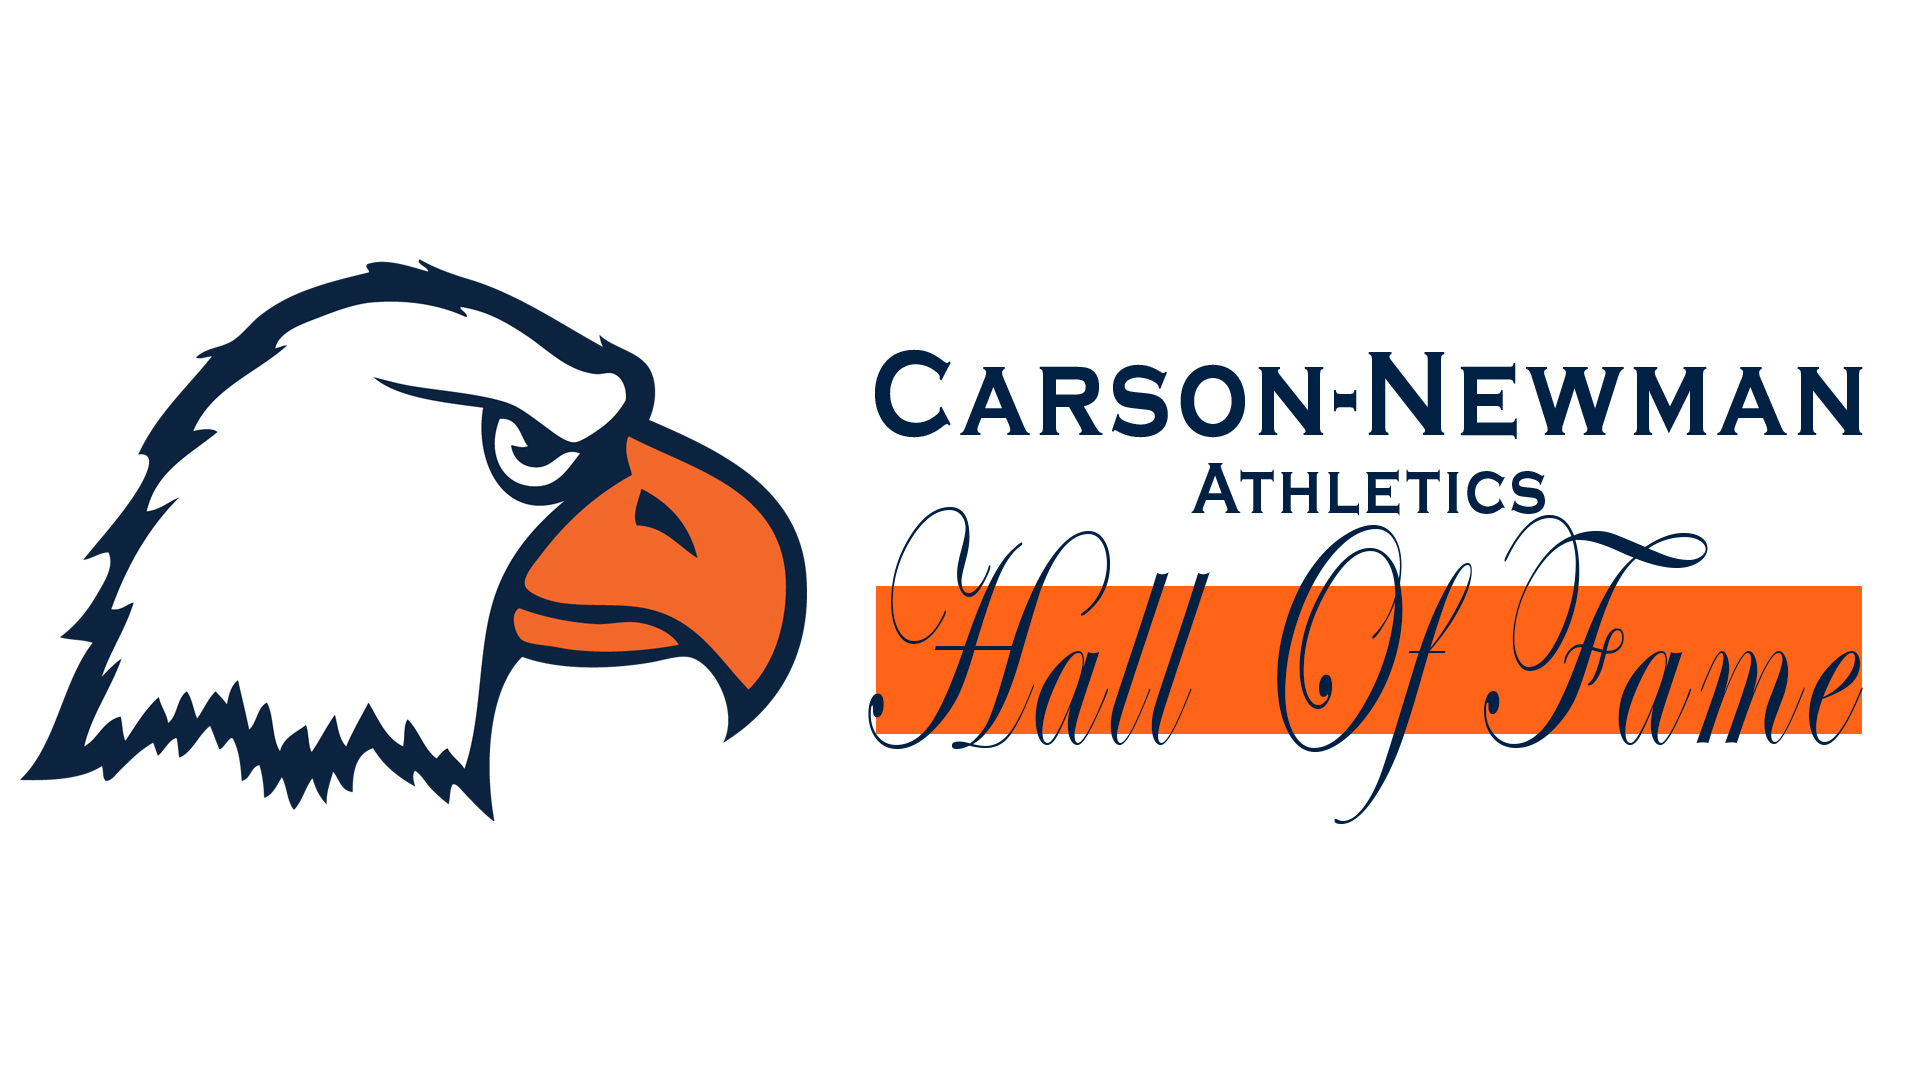 Nomination cycle for Carson-Newman Athletics Hall of Fame Closes Aug. 1